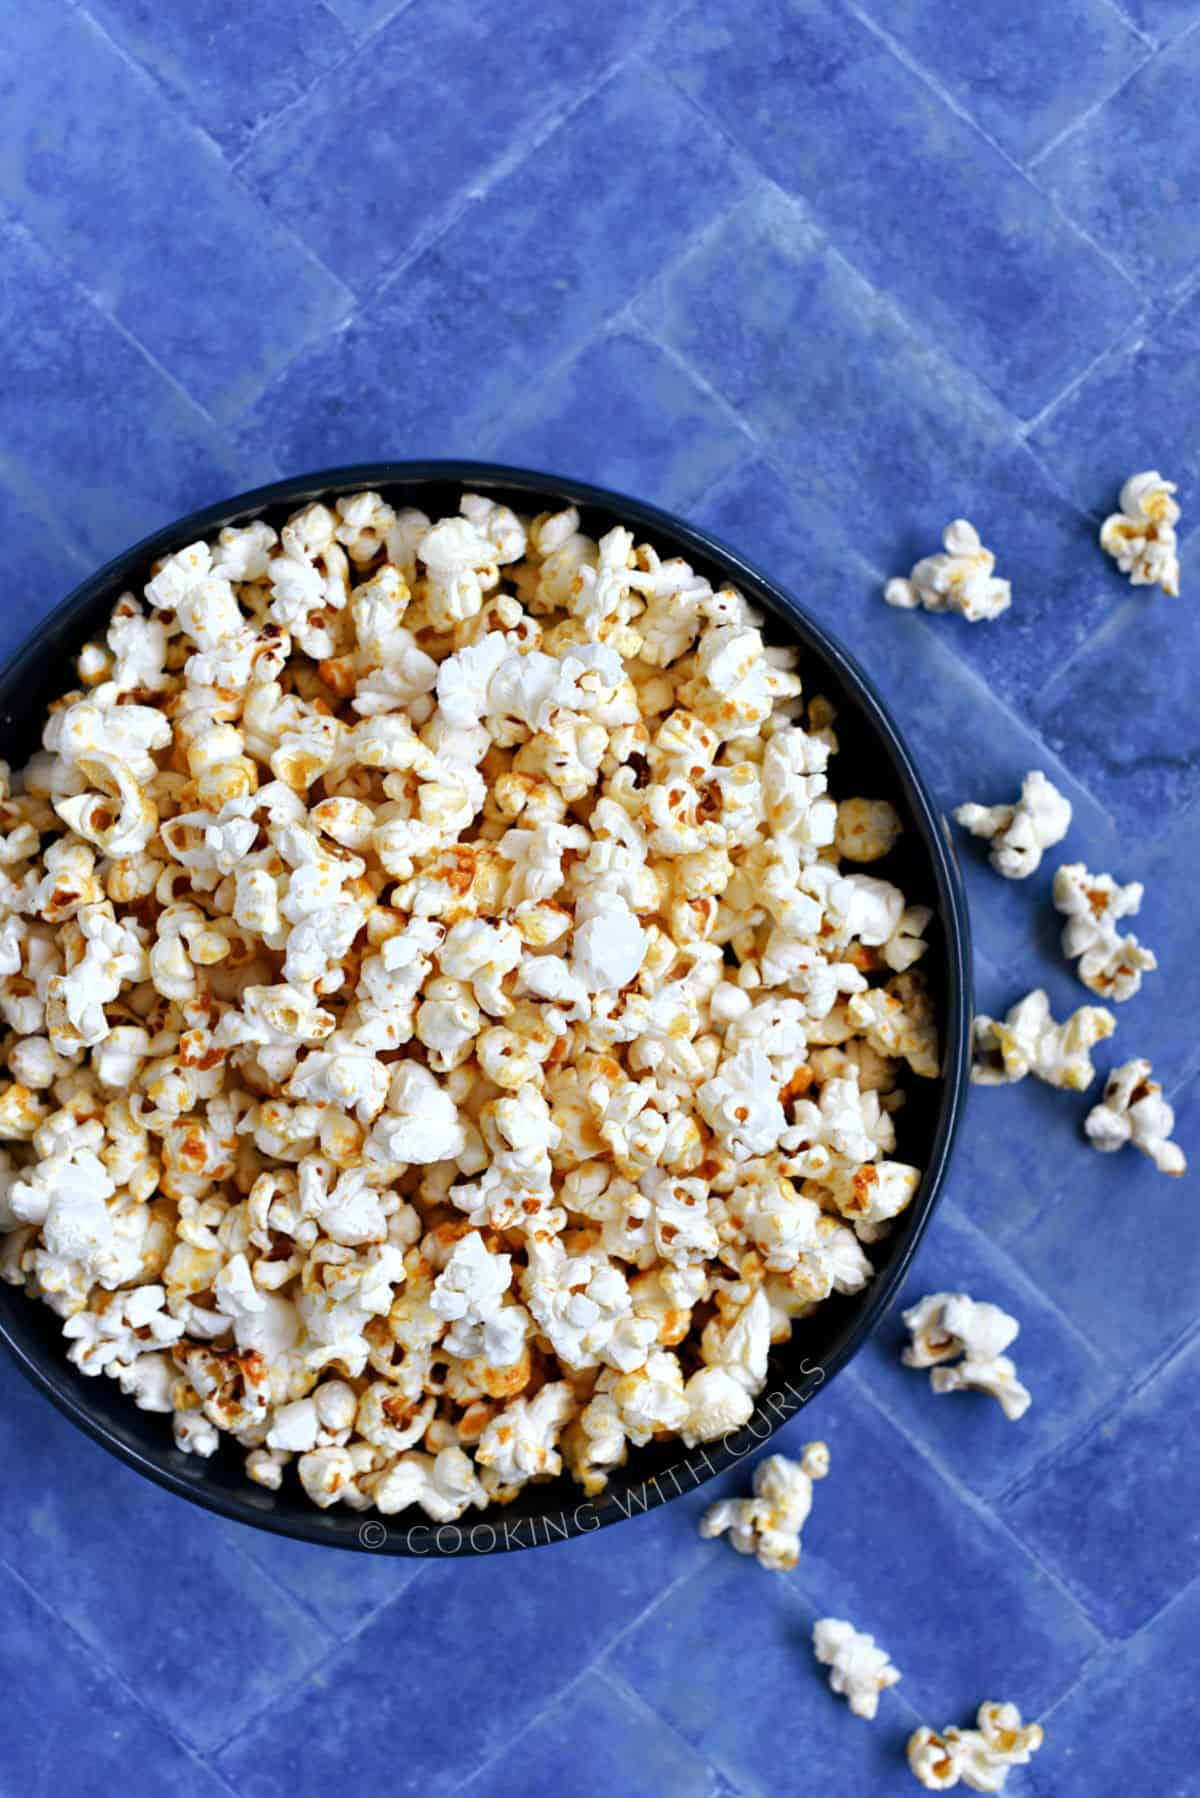 A bowl full of kettle corn popcorn sitting on a blue tile background.